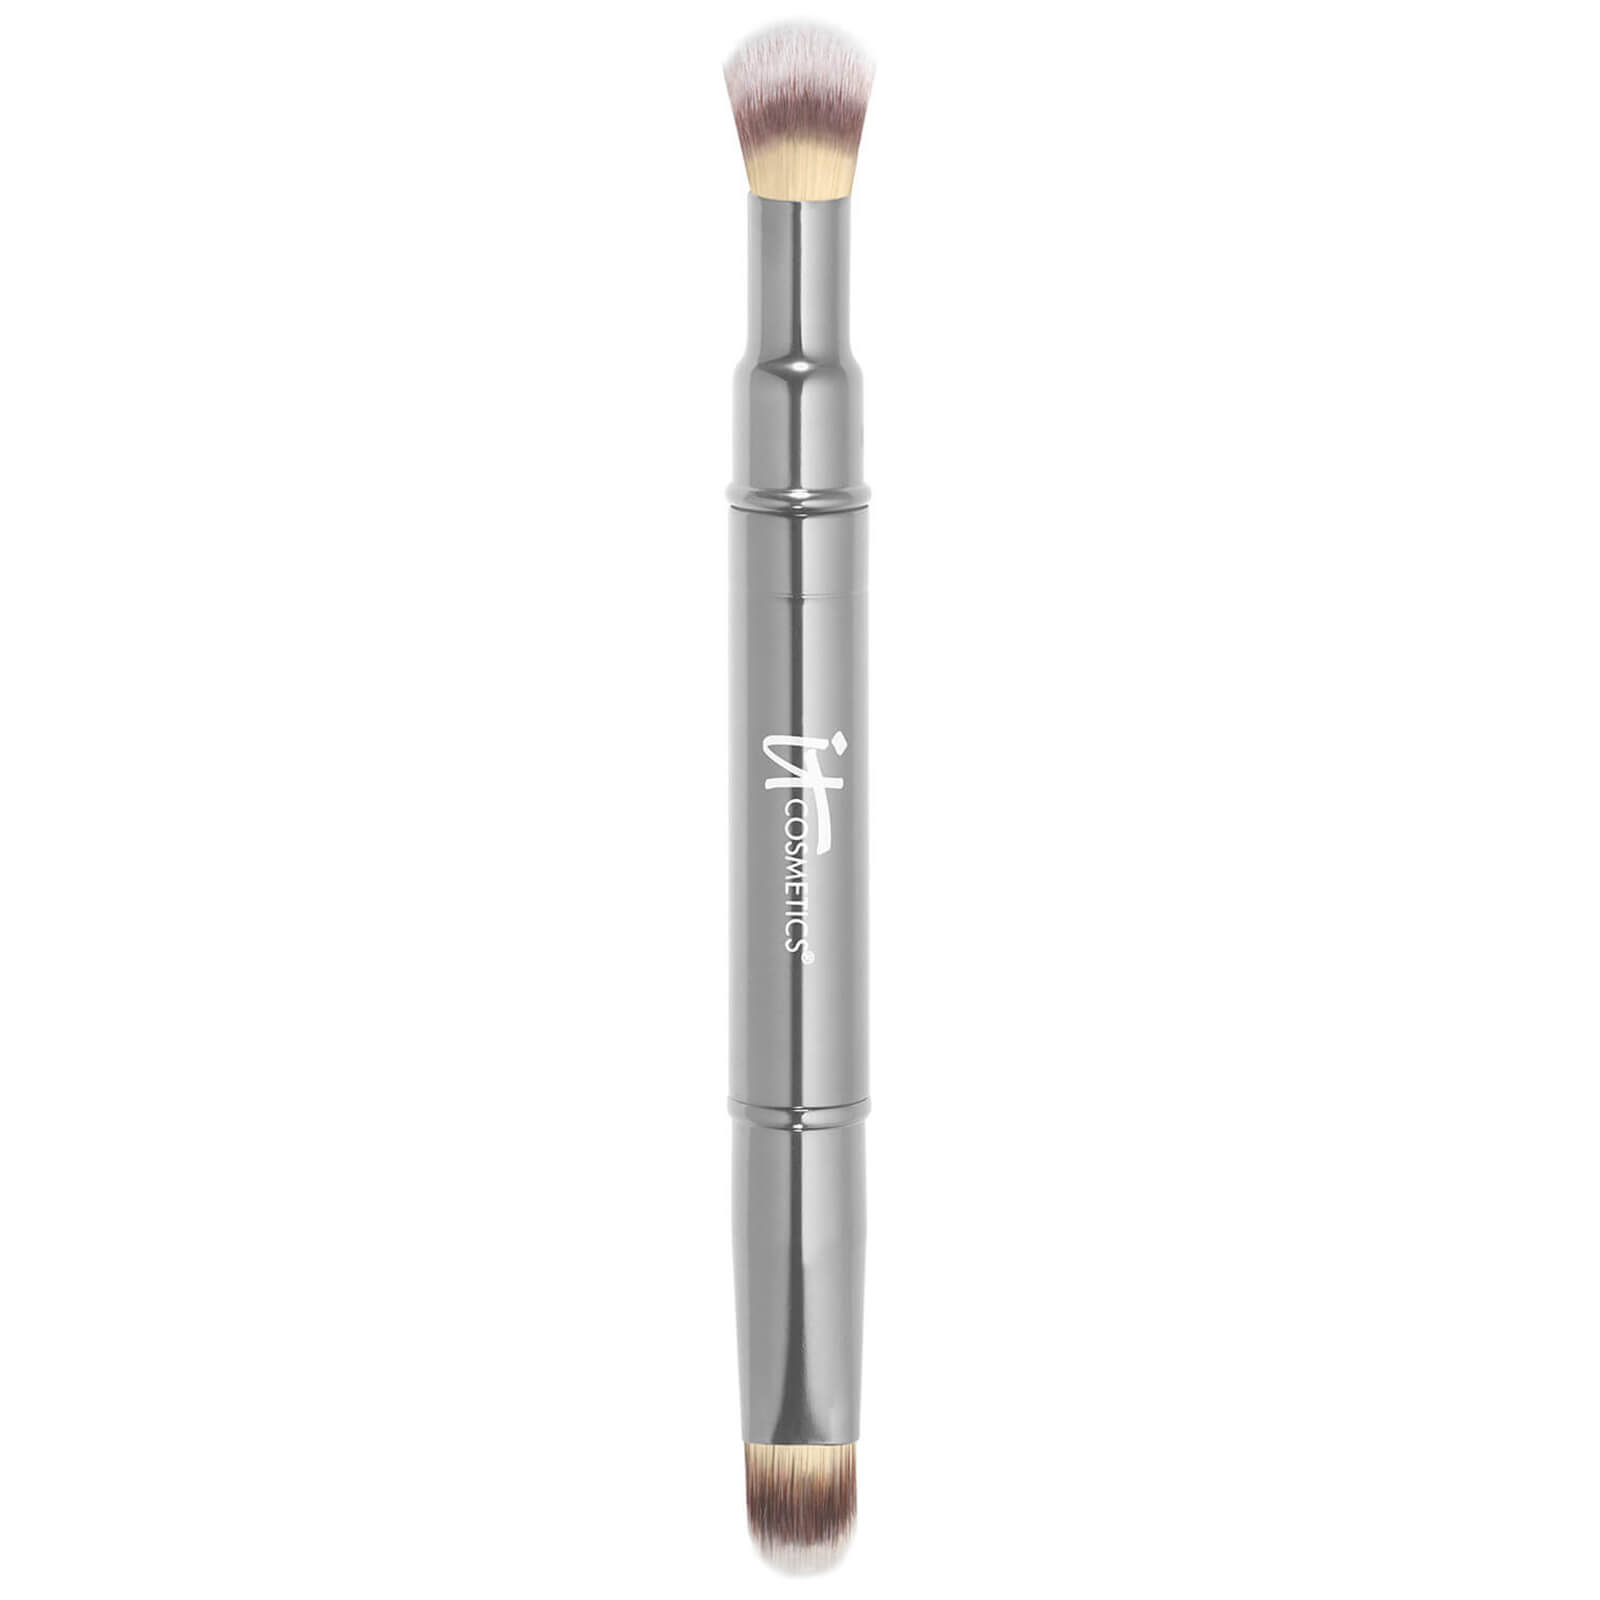 Image of IT Cosmetics Heavenly Luxe Dual Airbrush Concealer Brush #2